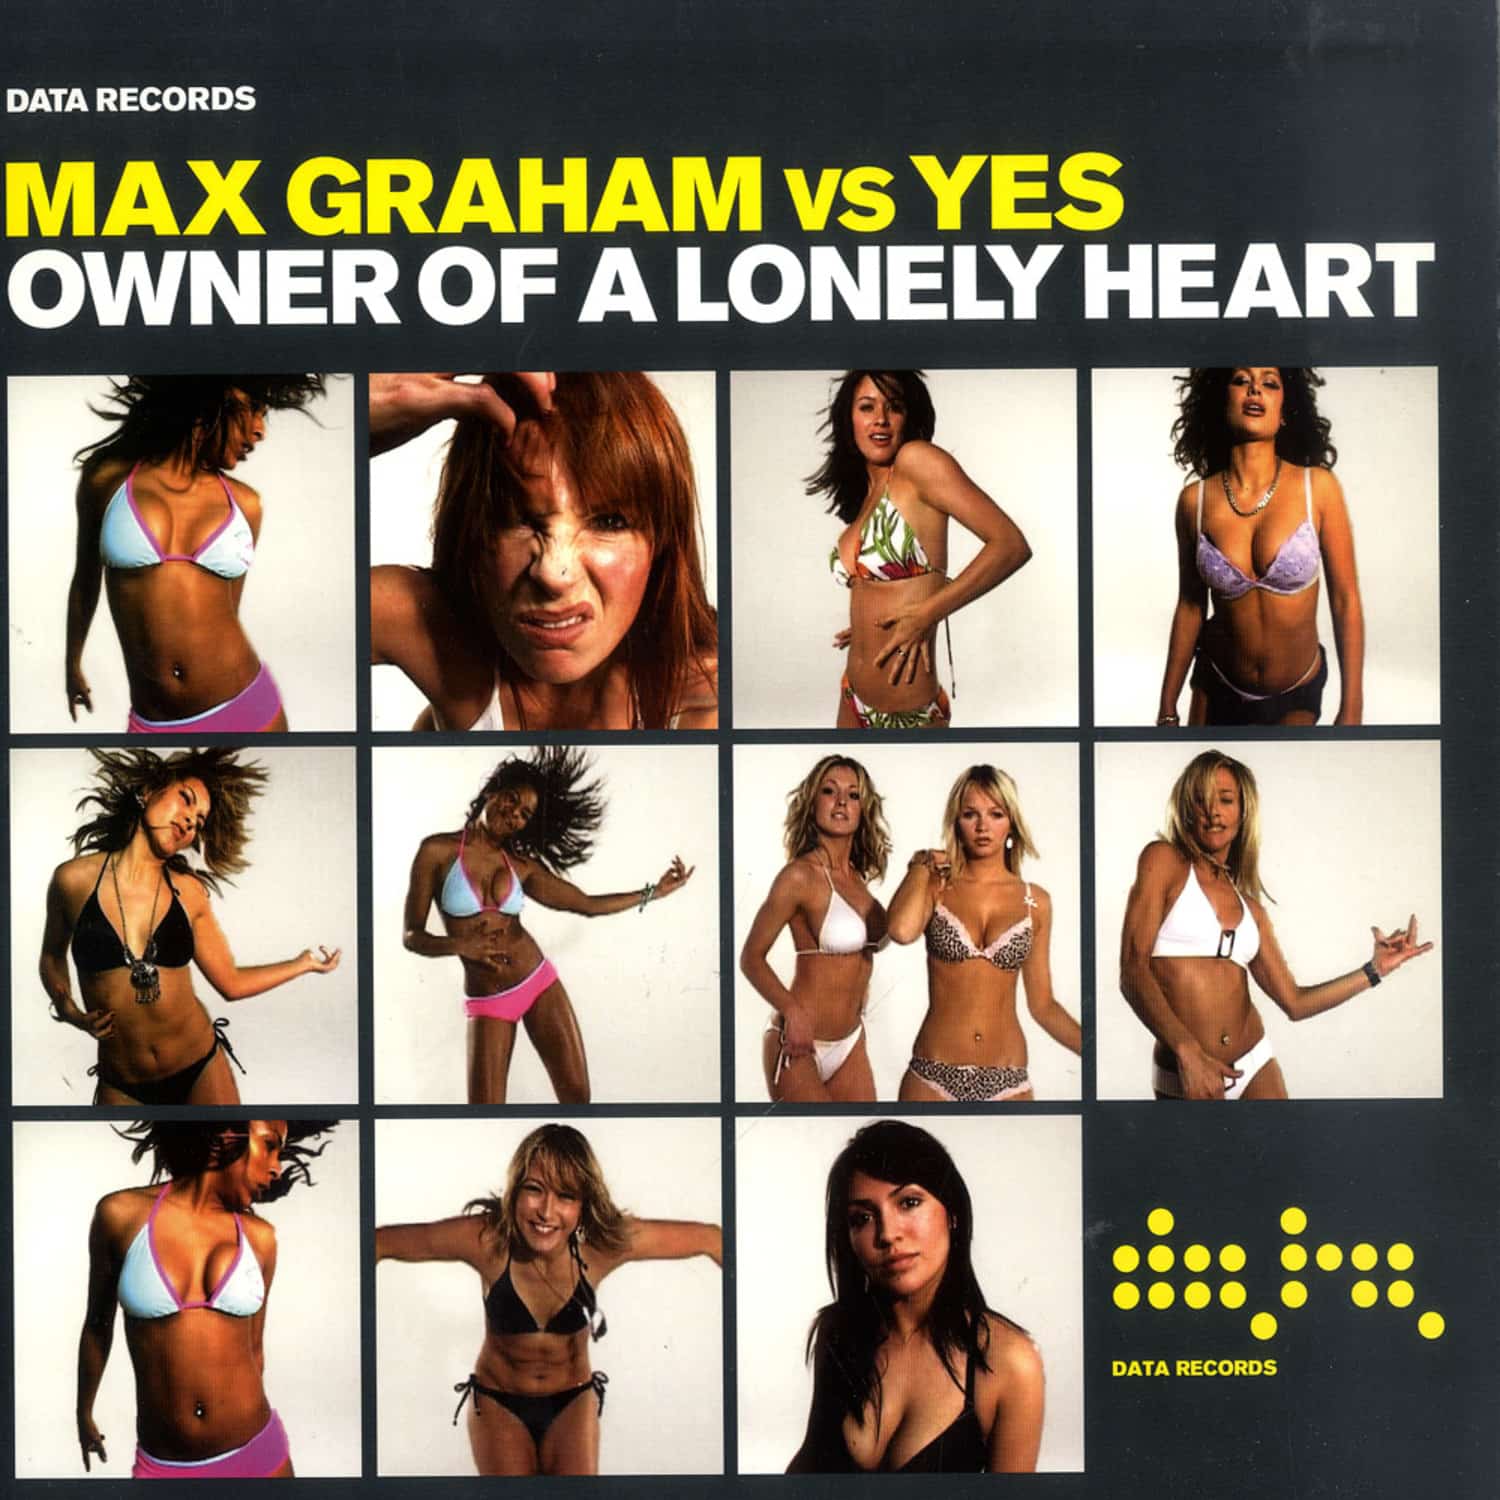 Max Graham vs Yes - OWNER OF A LONELY HEART